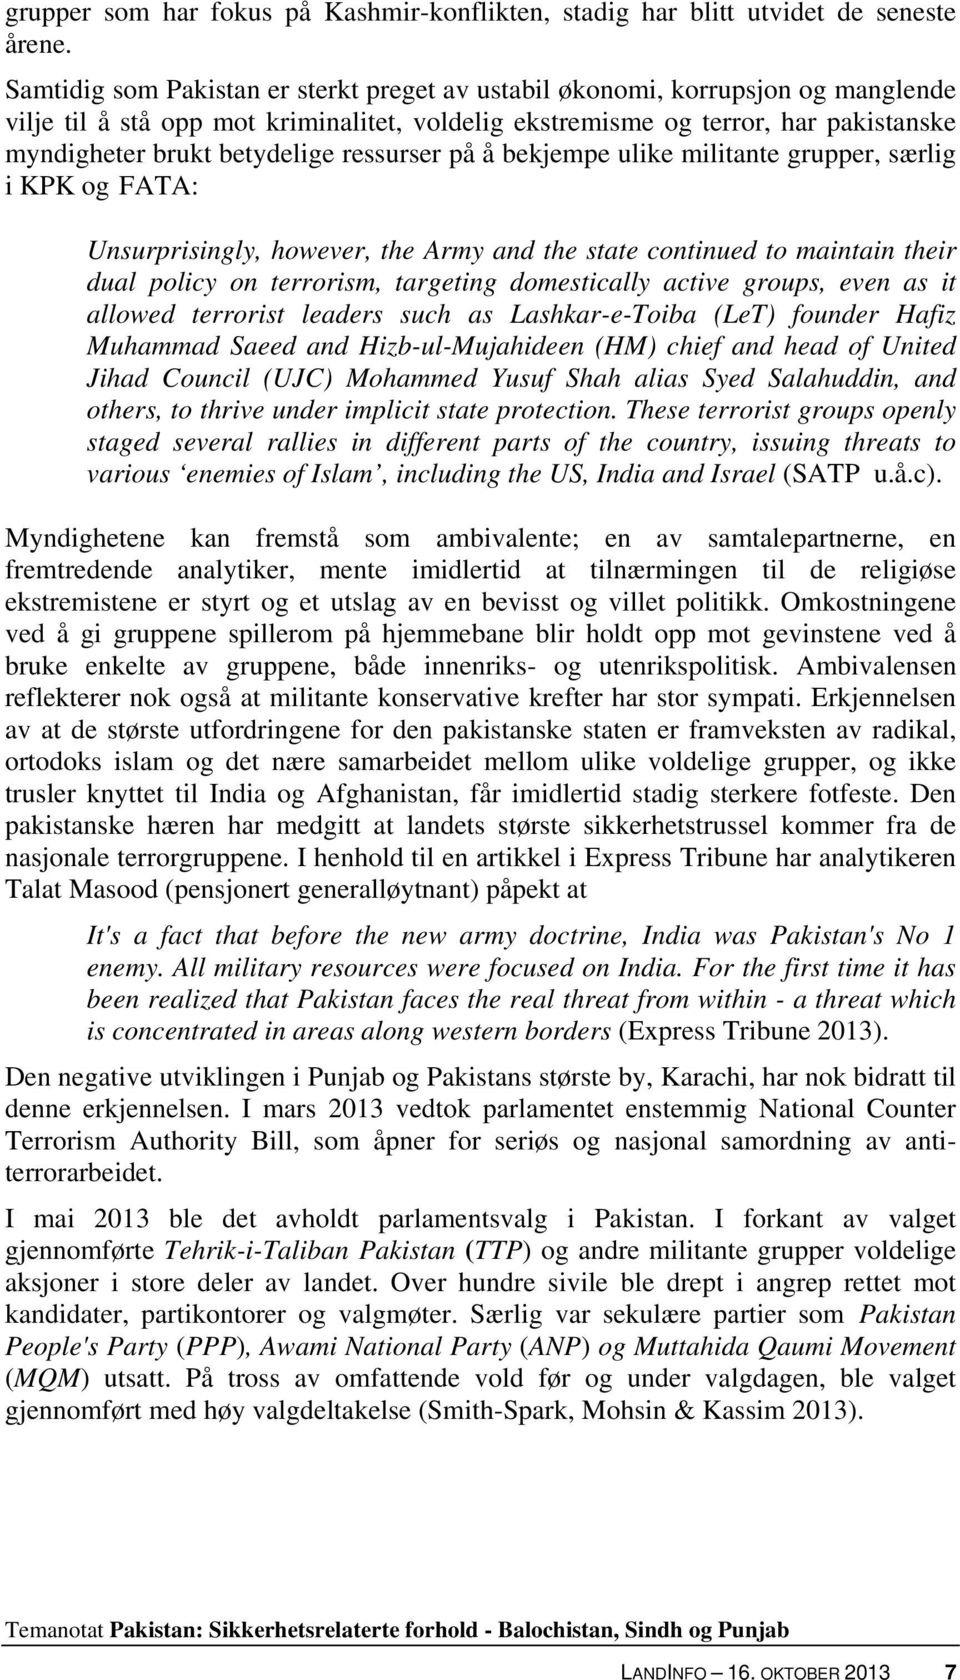 ressurser på å bekjempe ulike militante grupper, særlig i KPK og FATA: Unsurprisingly, however, the Army and the state continued to maintain their dual policy on terrorism, targeting domestically